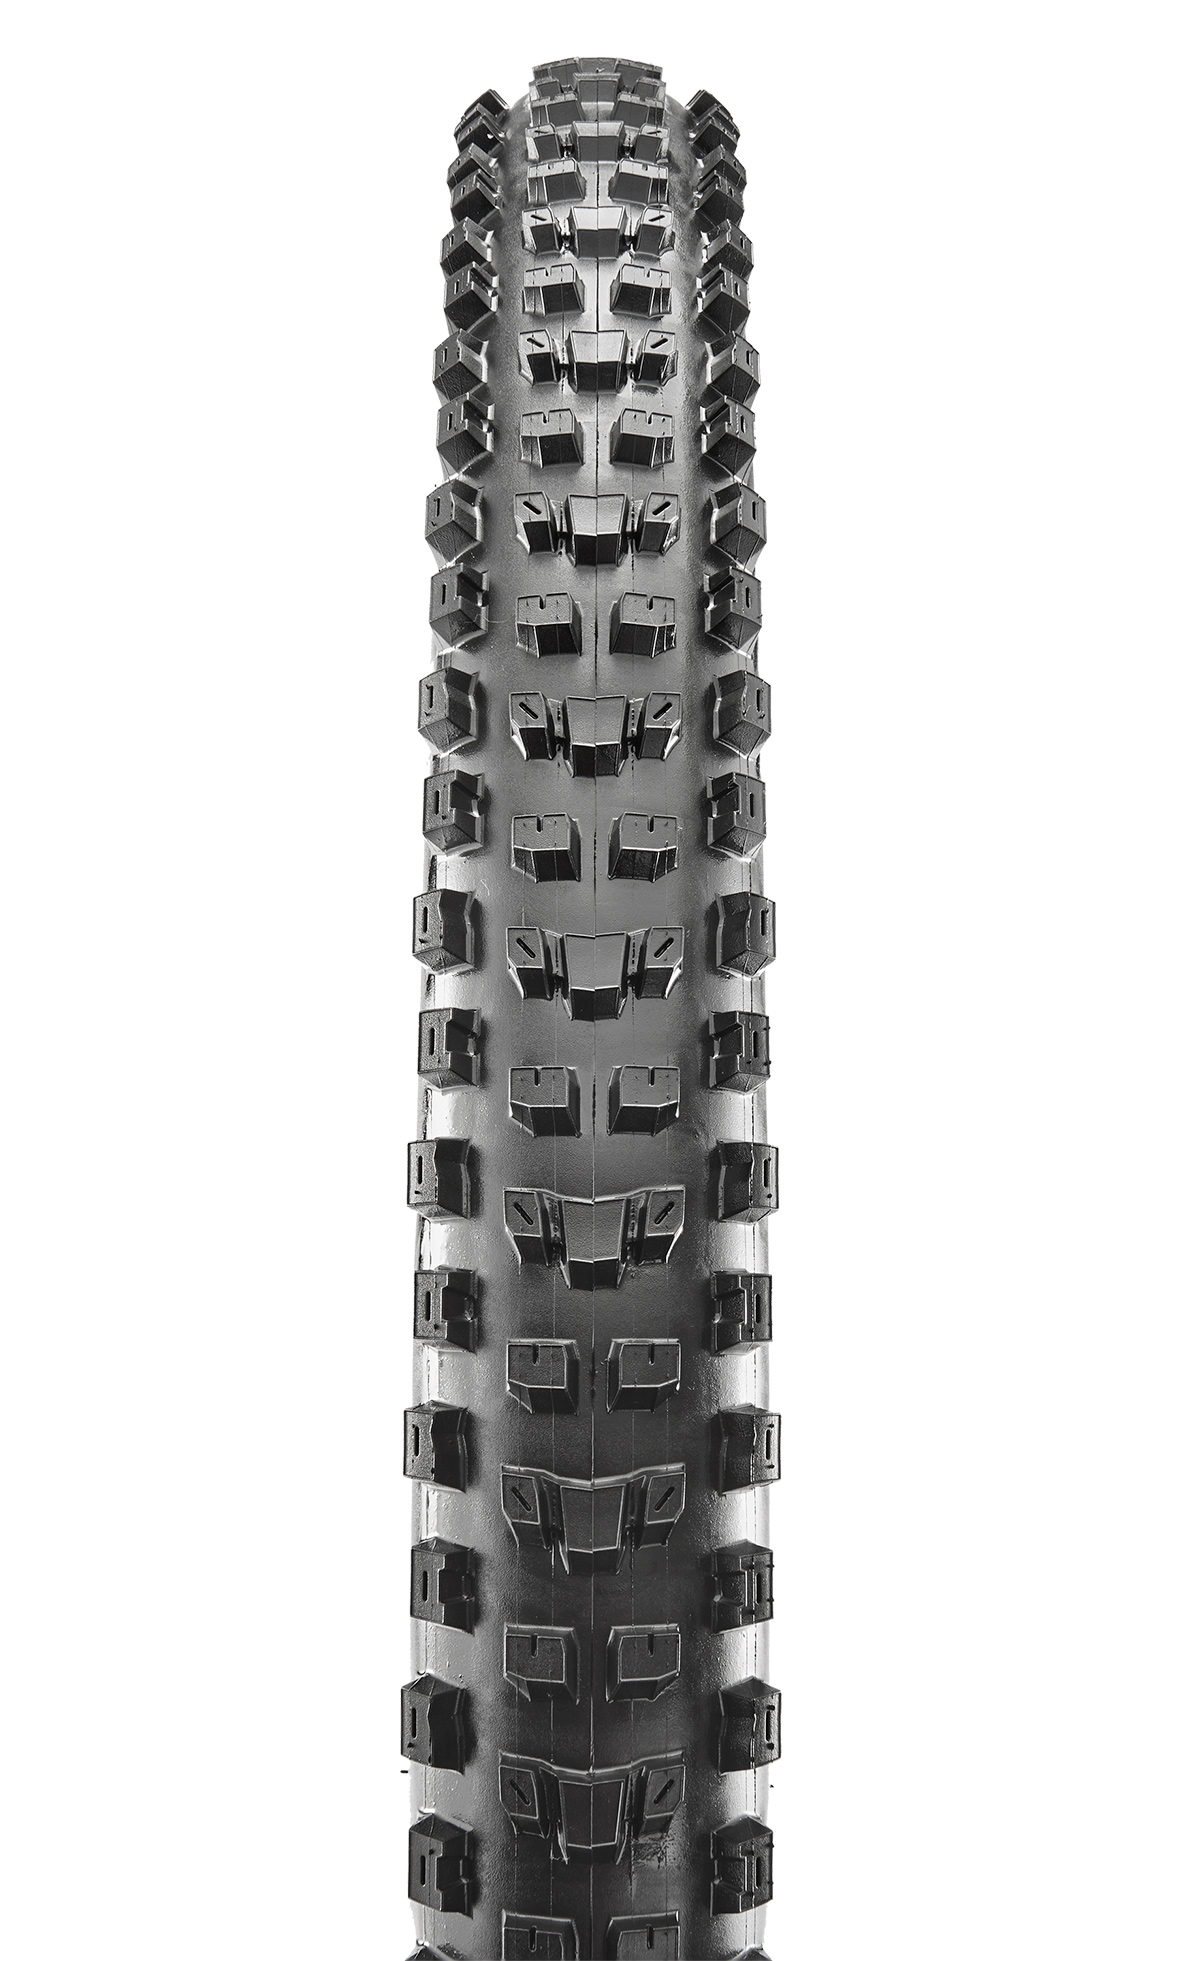 Maxxis Dissector bicycle tire tread